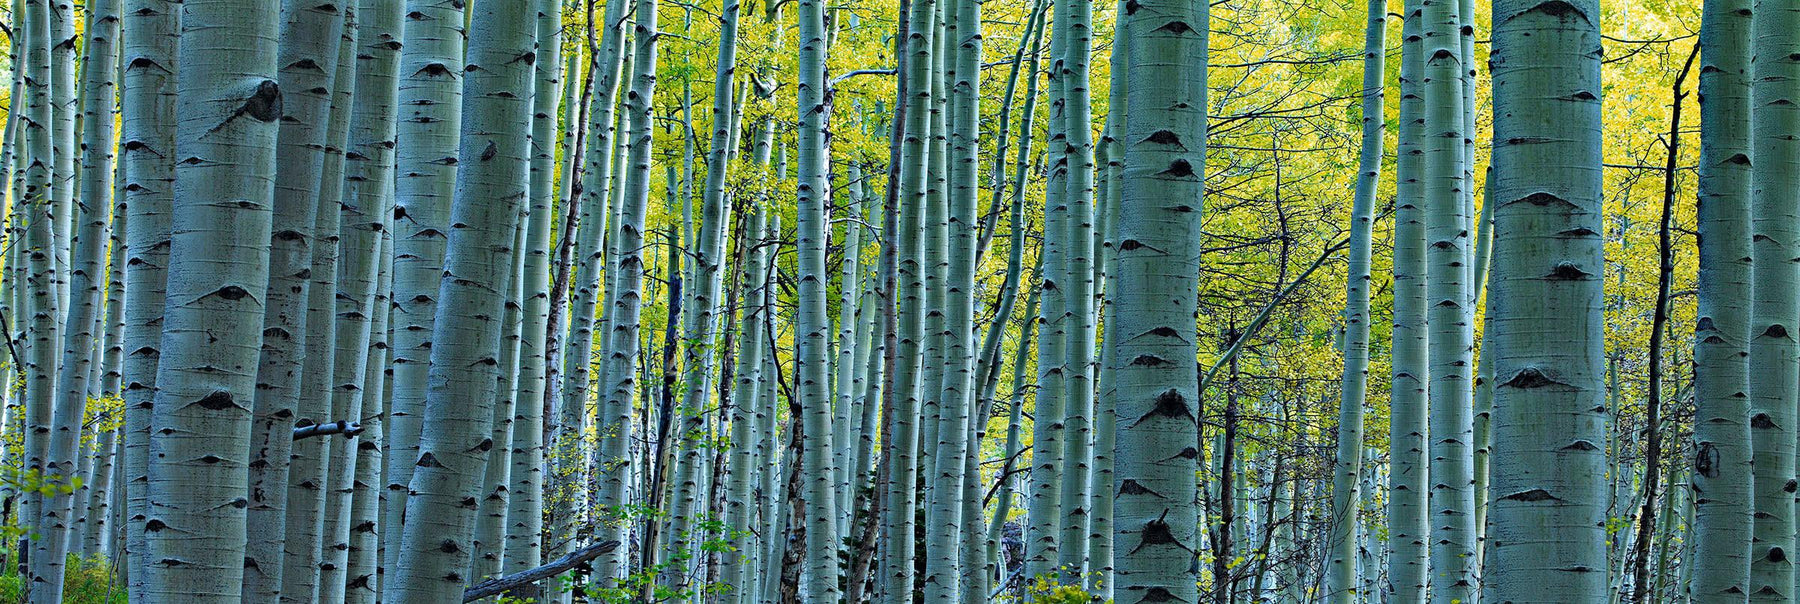 Sunlight filtering filtering through the green and yellow leaves of a Birch tree forest in Colorado